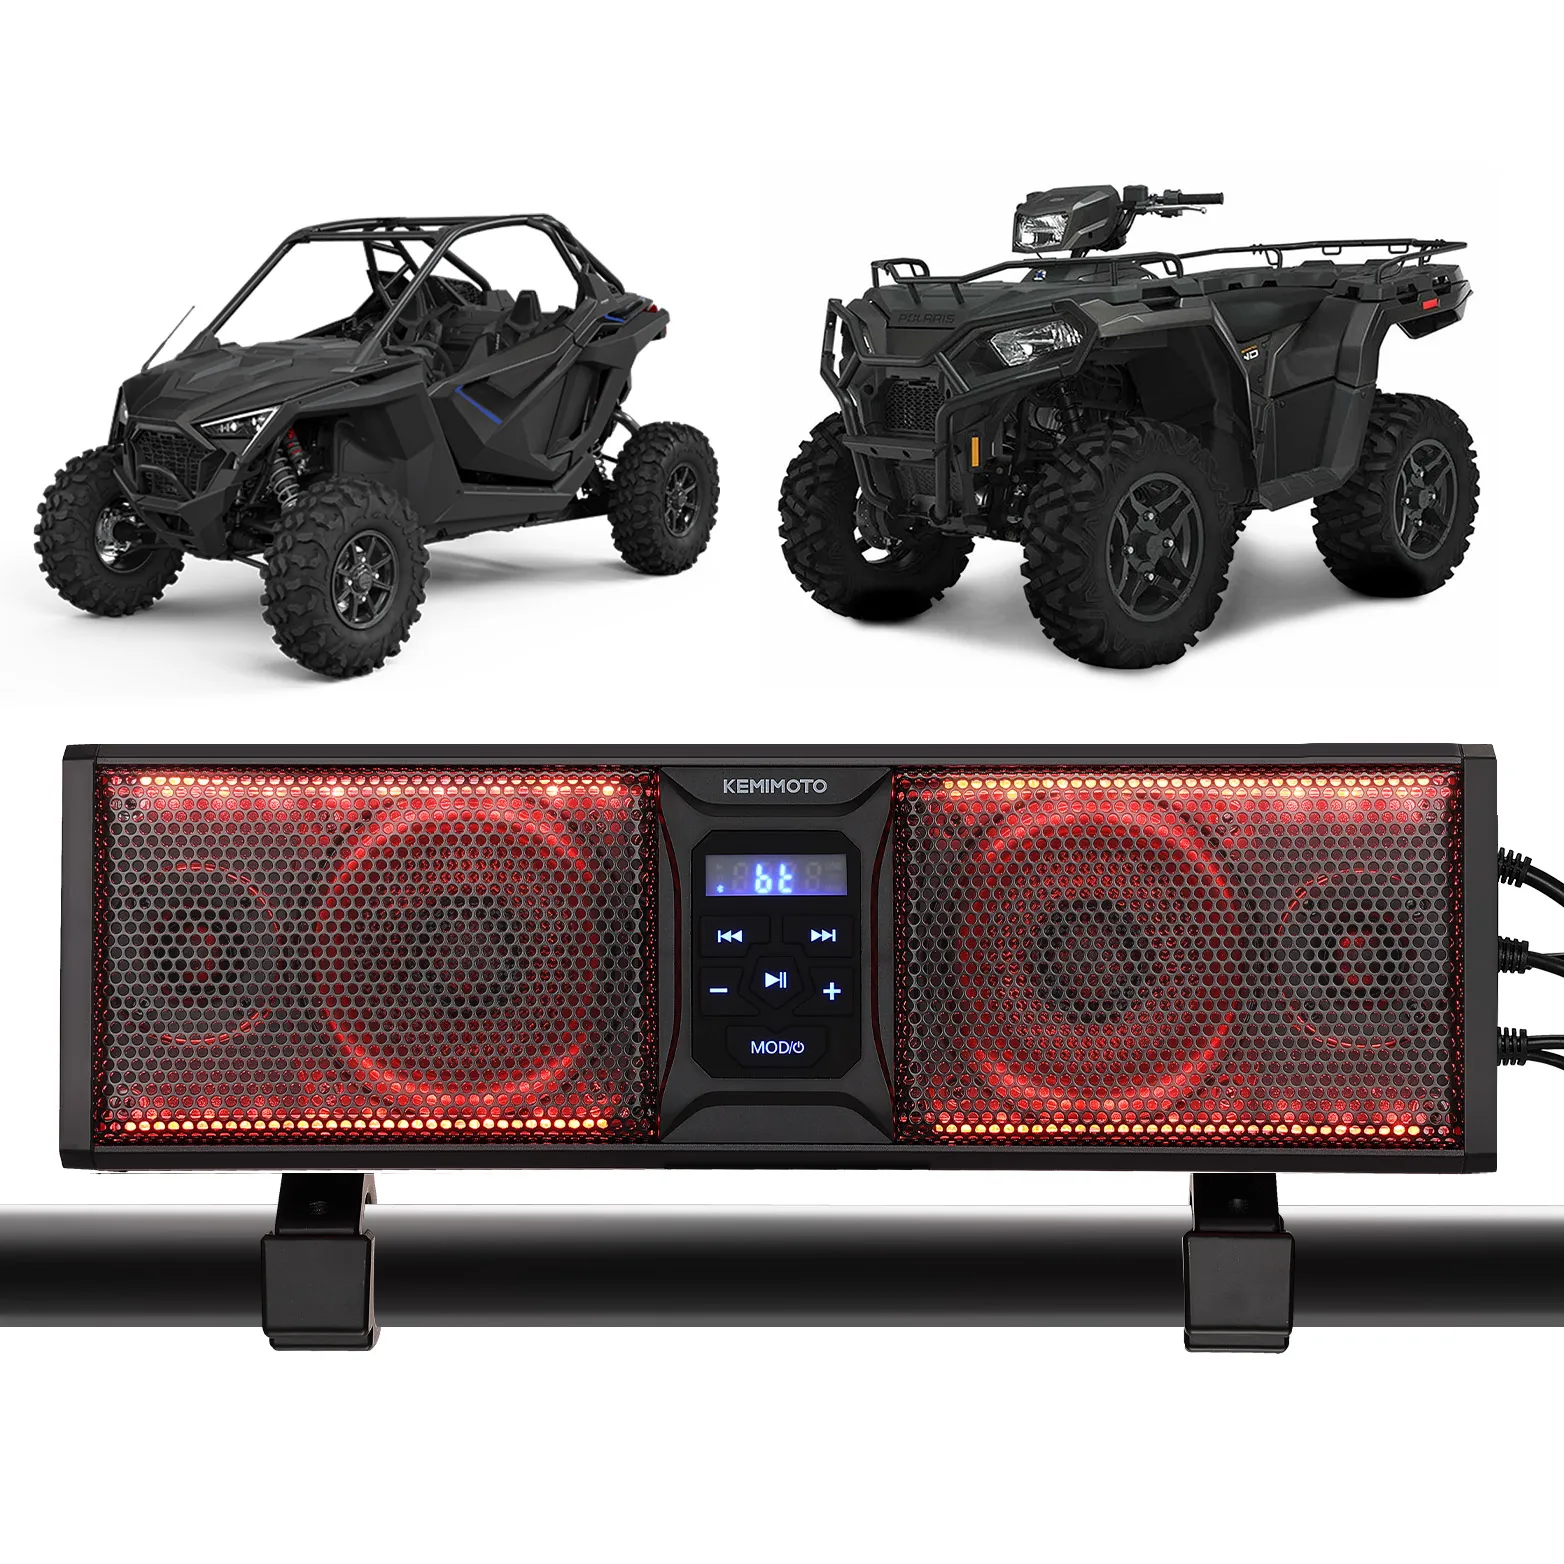 16inch UTV Sound Bar System SXS Speakers Waterproof Bluetooth Multicolor LED Lighting for Can-Am X3 Compatible with Polaris RZR msz miniatura 1 32 scale alloy diecast collectable model cars pull back open doors toy vehicles with sound and light for kid